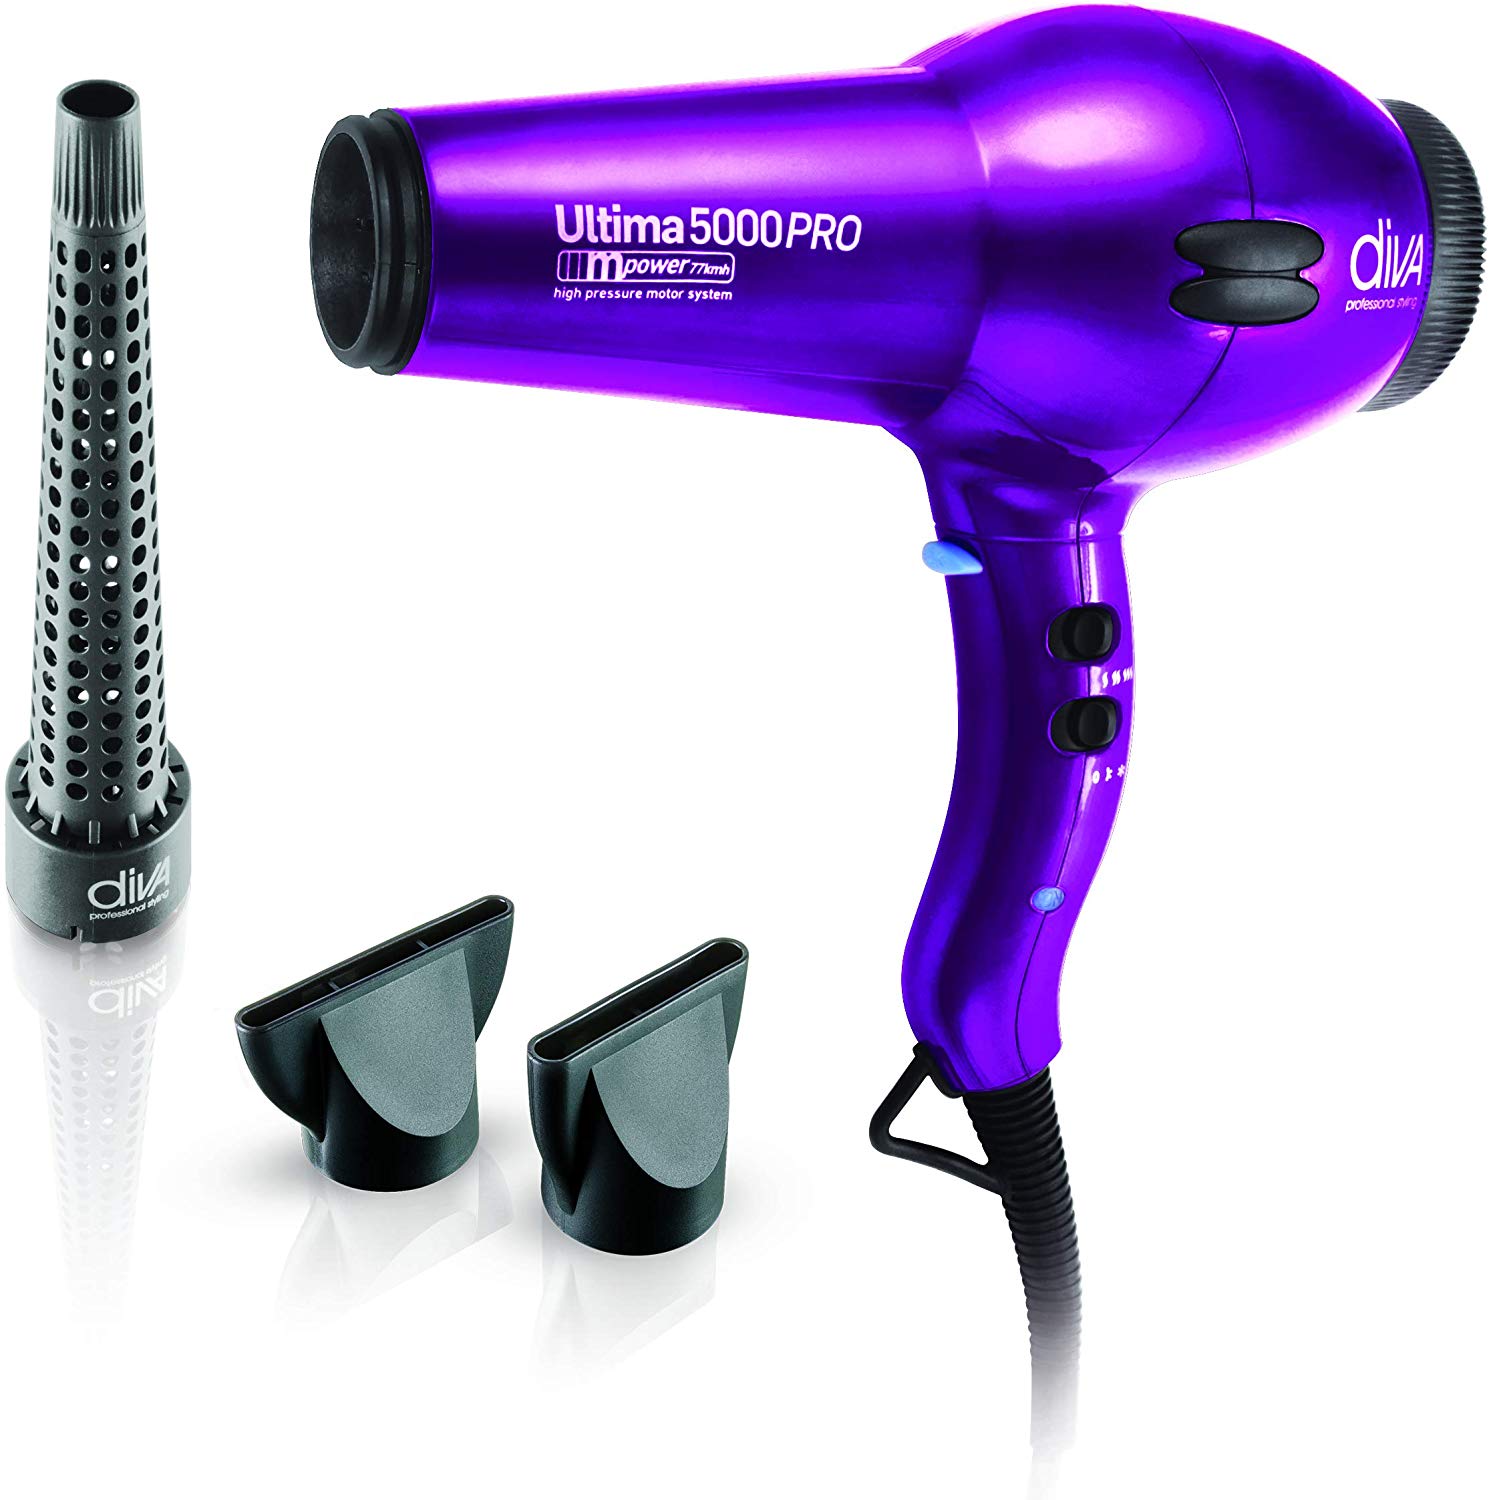 Image of the Diva Ultimo 5000 Pro hairdryer and its attachments